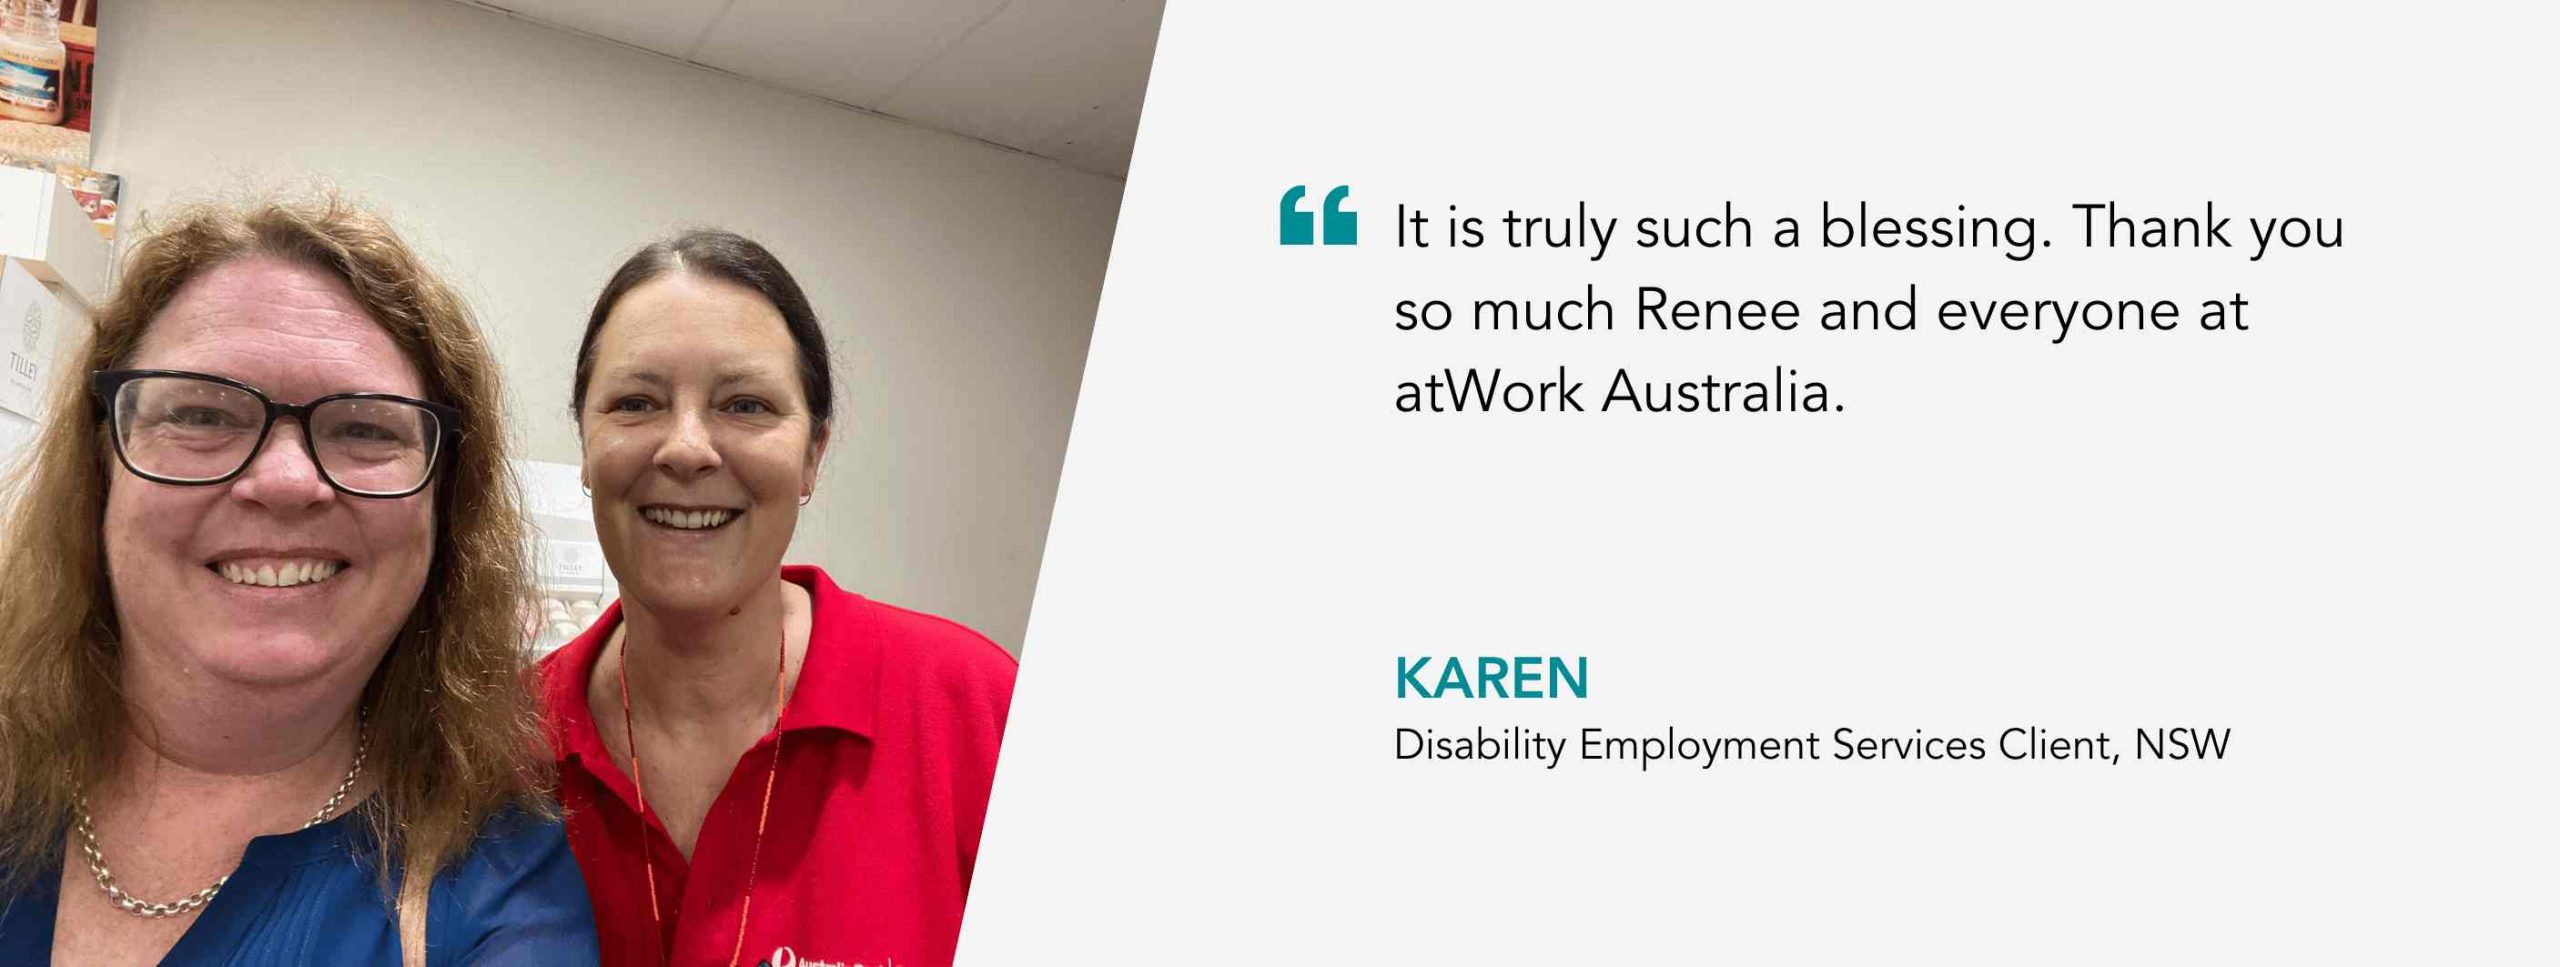 It is truly such a blessing. Thank you so much Renee and everyone at atWork Australia. Karen, Disability Employment Services Client, NSW